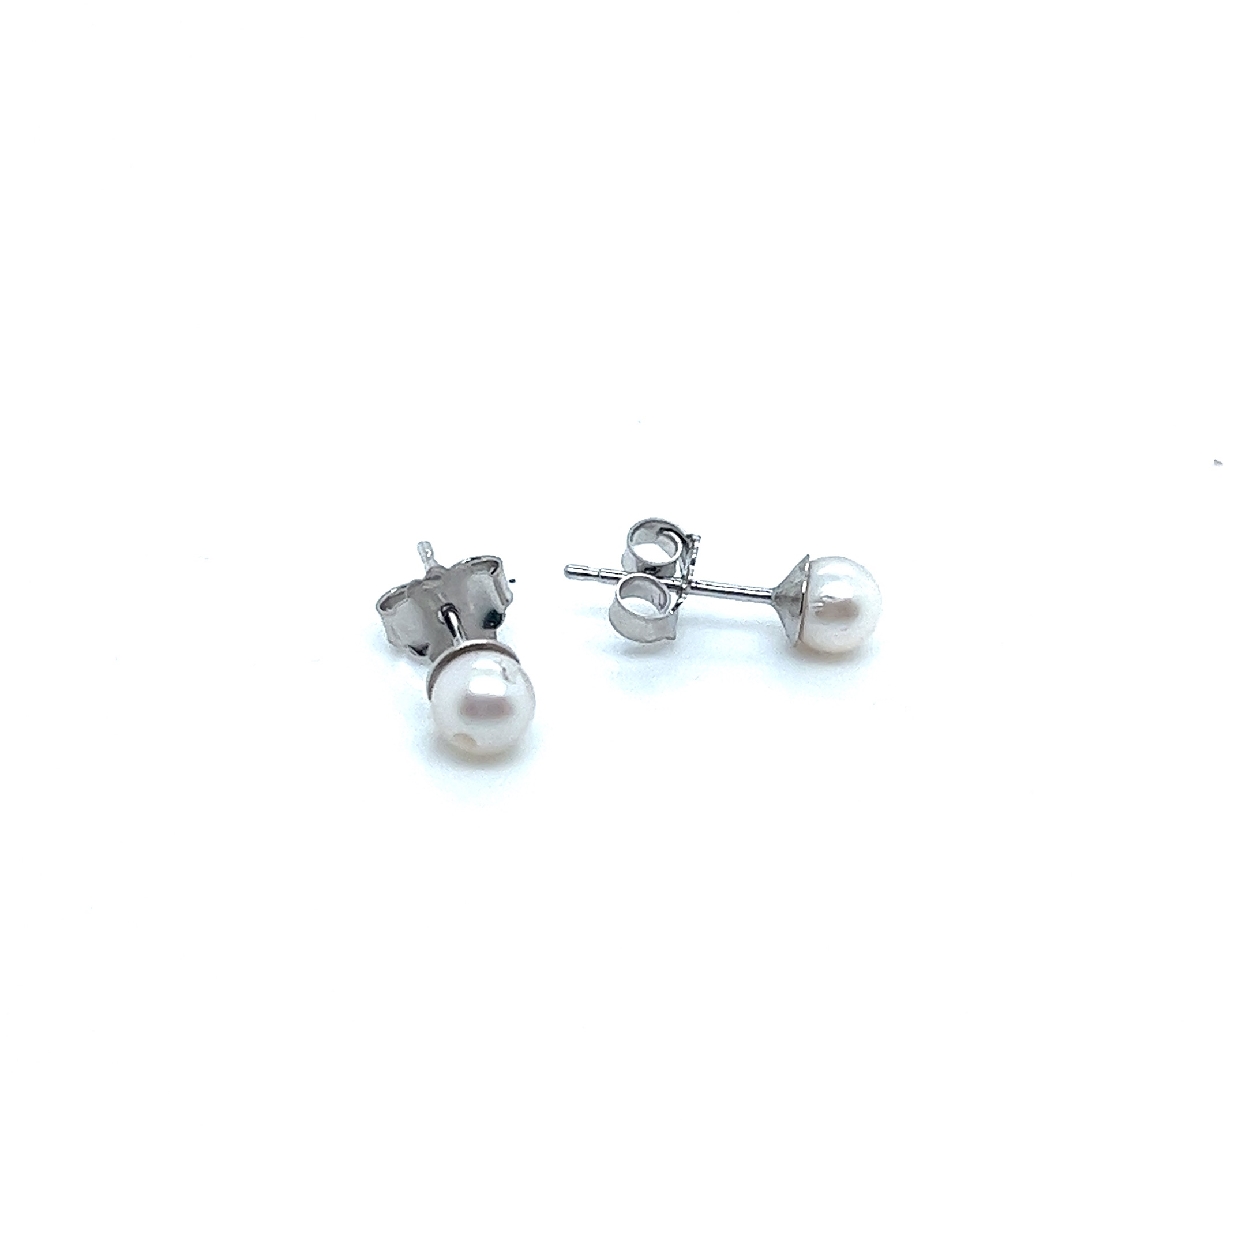 4mm Salt Water Pearl Stud Earrings on 14K White Gold Posts with Friction Backs